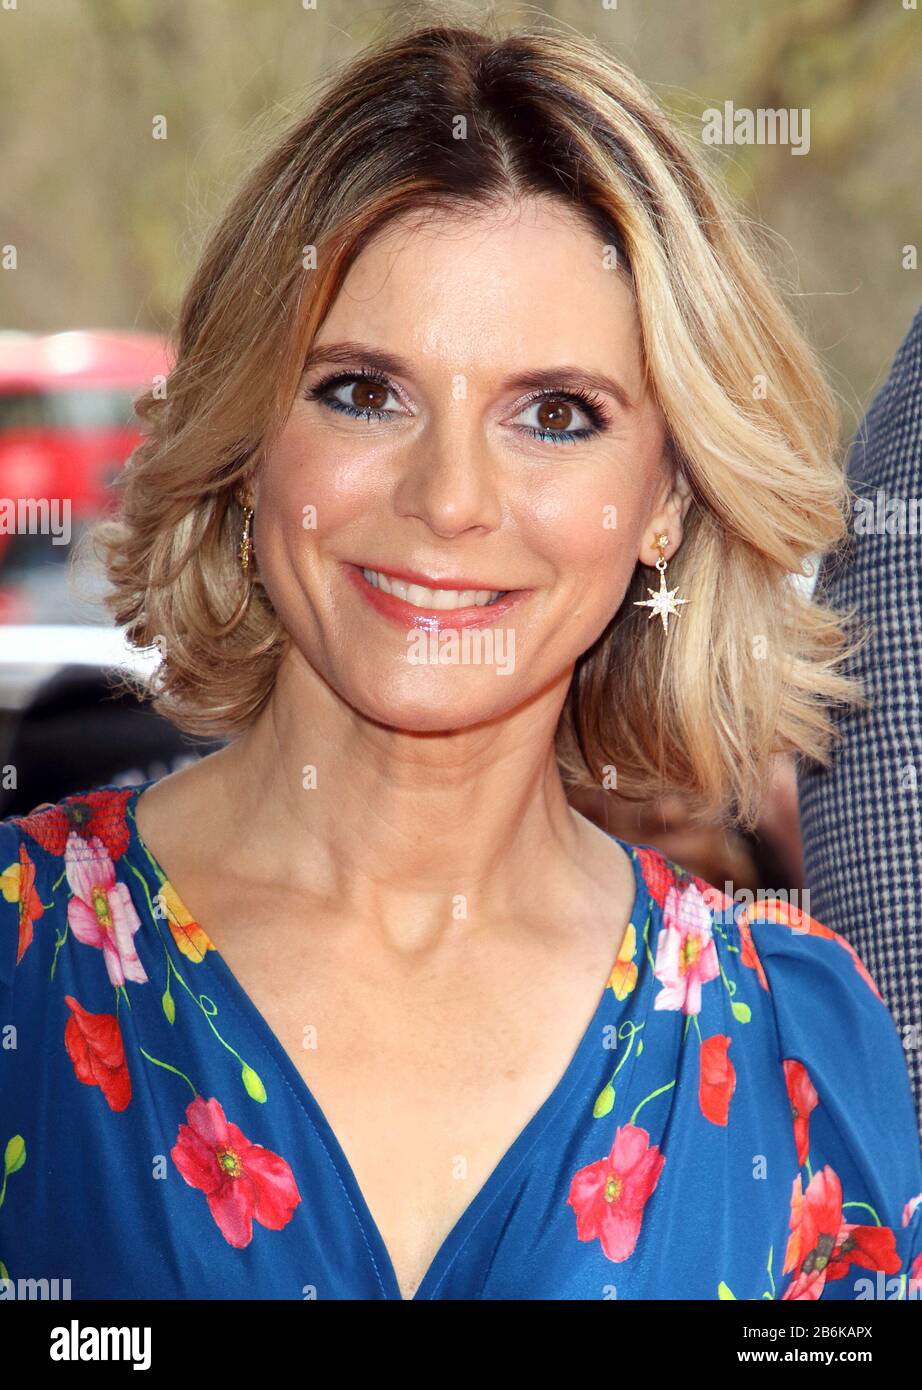 Emilia Fox attends the TRIC Awards 2020 held at the Grosvenor House, Park Lane in London. Stock Photo